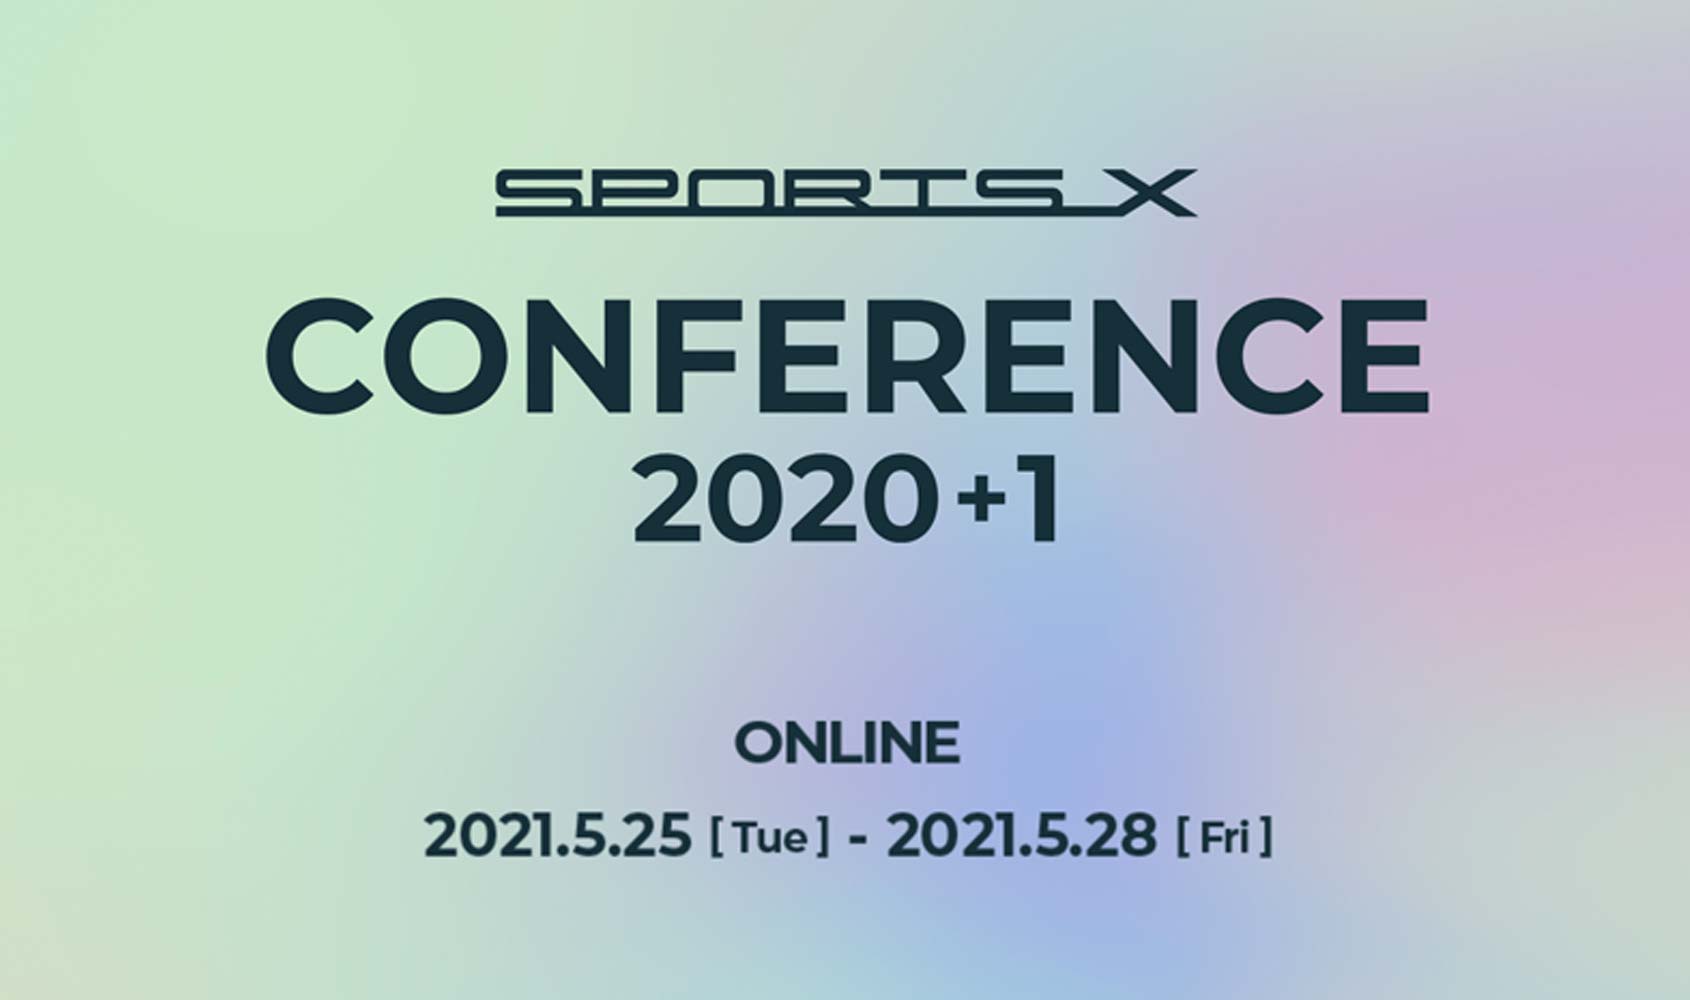 Sports X Conference 2020+1